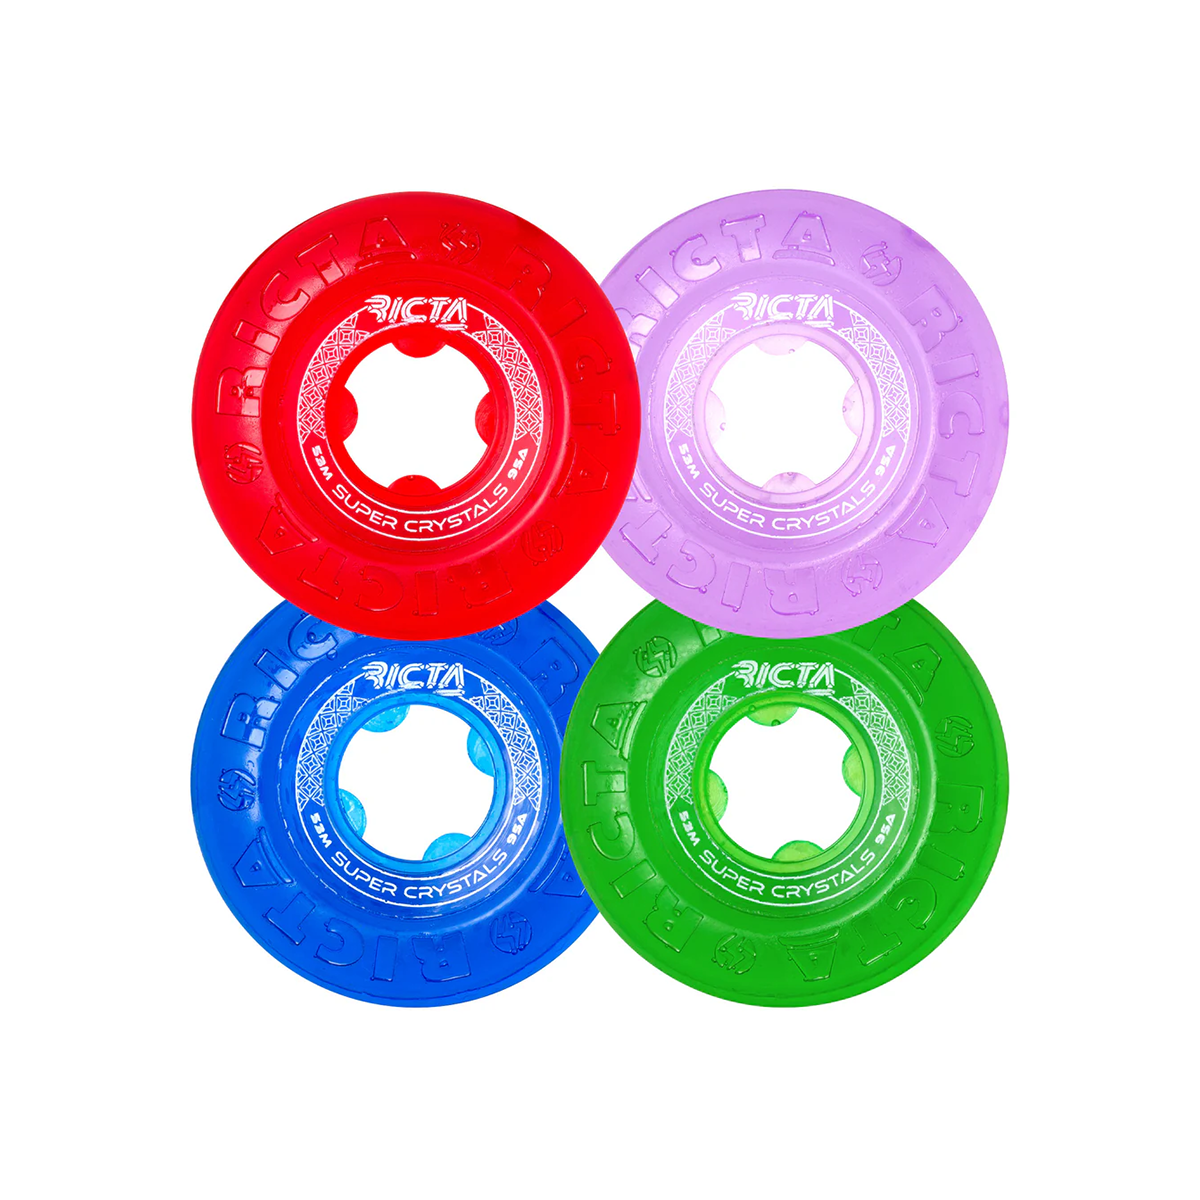 Ricta Super Crystals Skate Wheels 95A Trans Purple Green Blue Red - 53mm